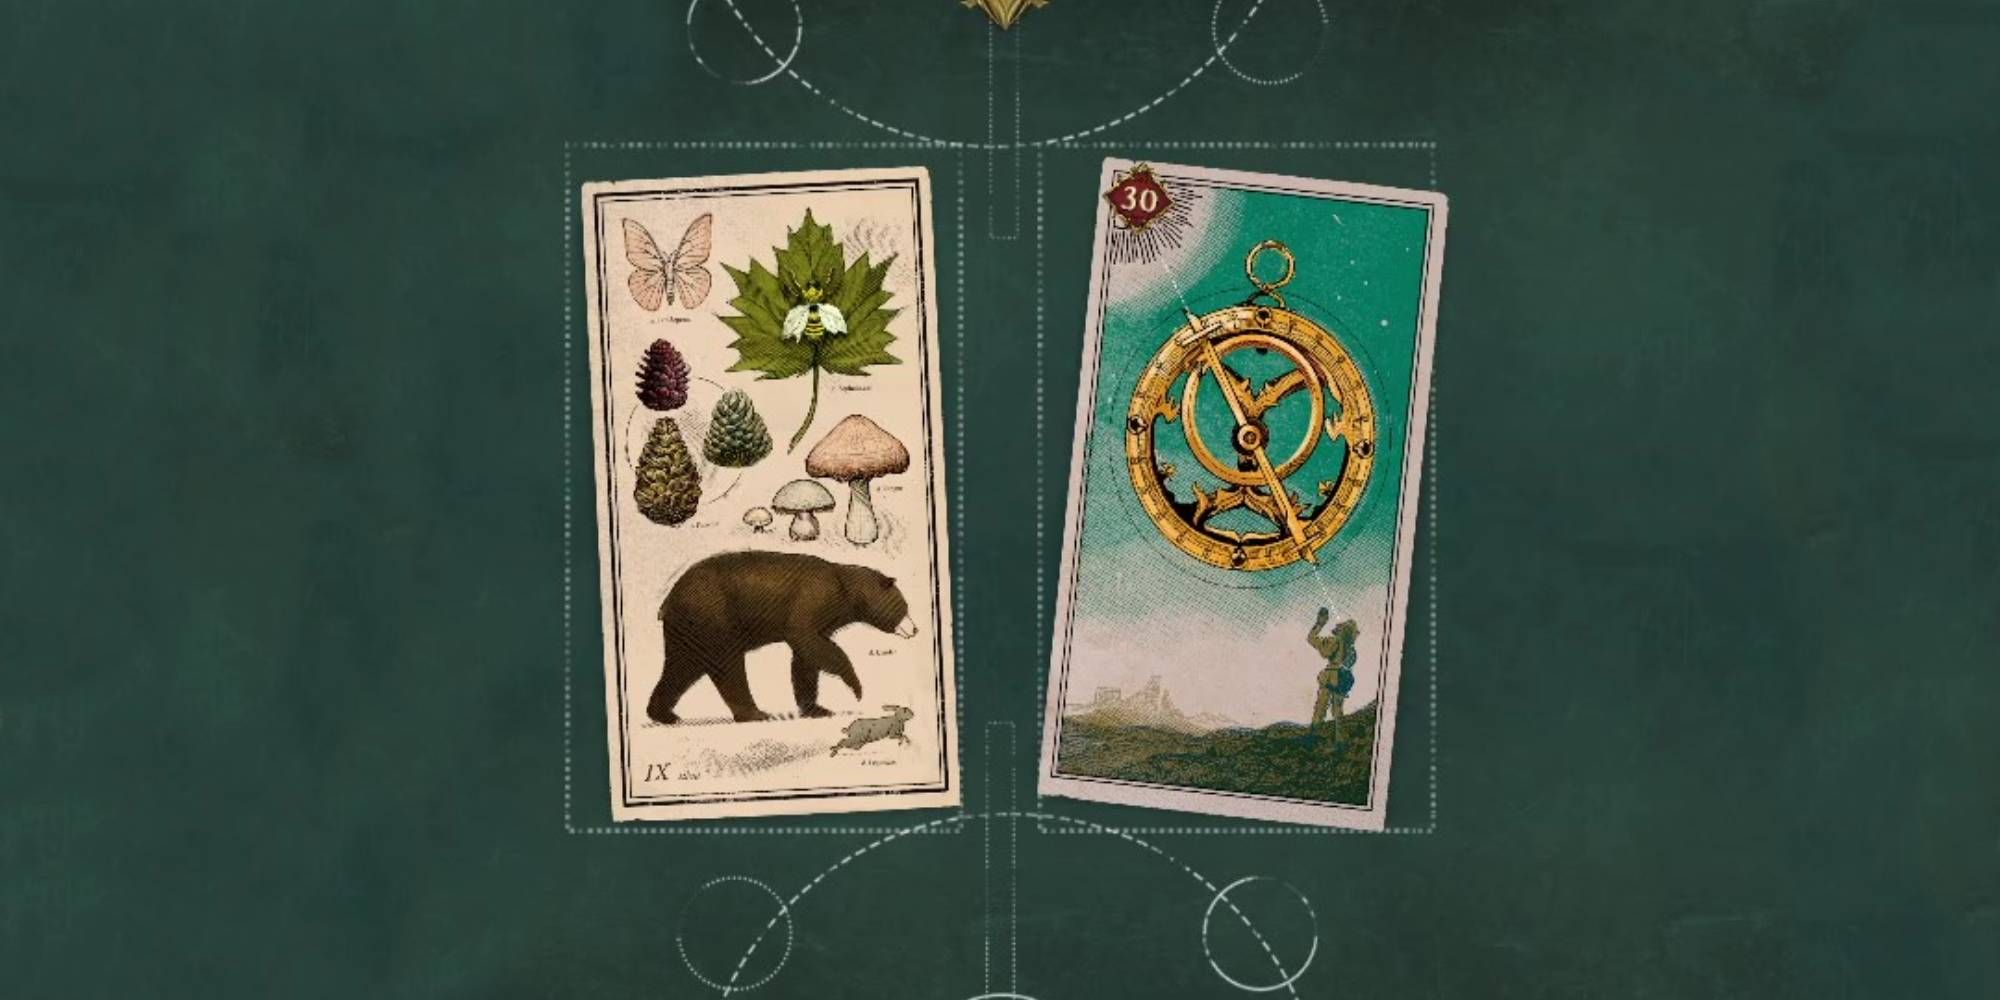 Nightingale a Forest Biome Card and an Astrolabe Major Realm Card